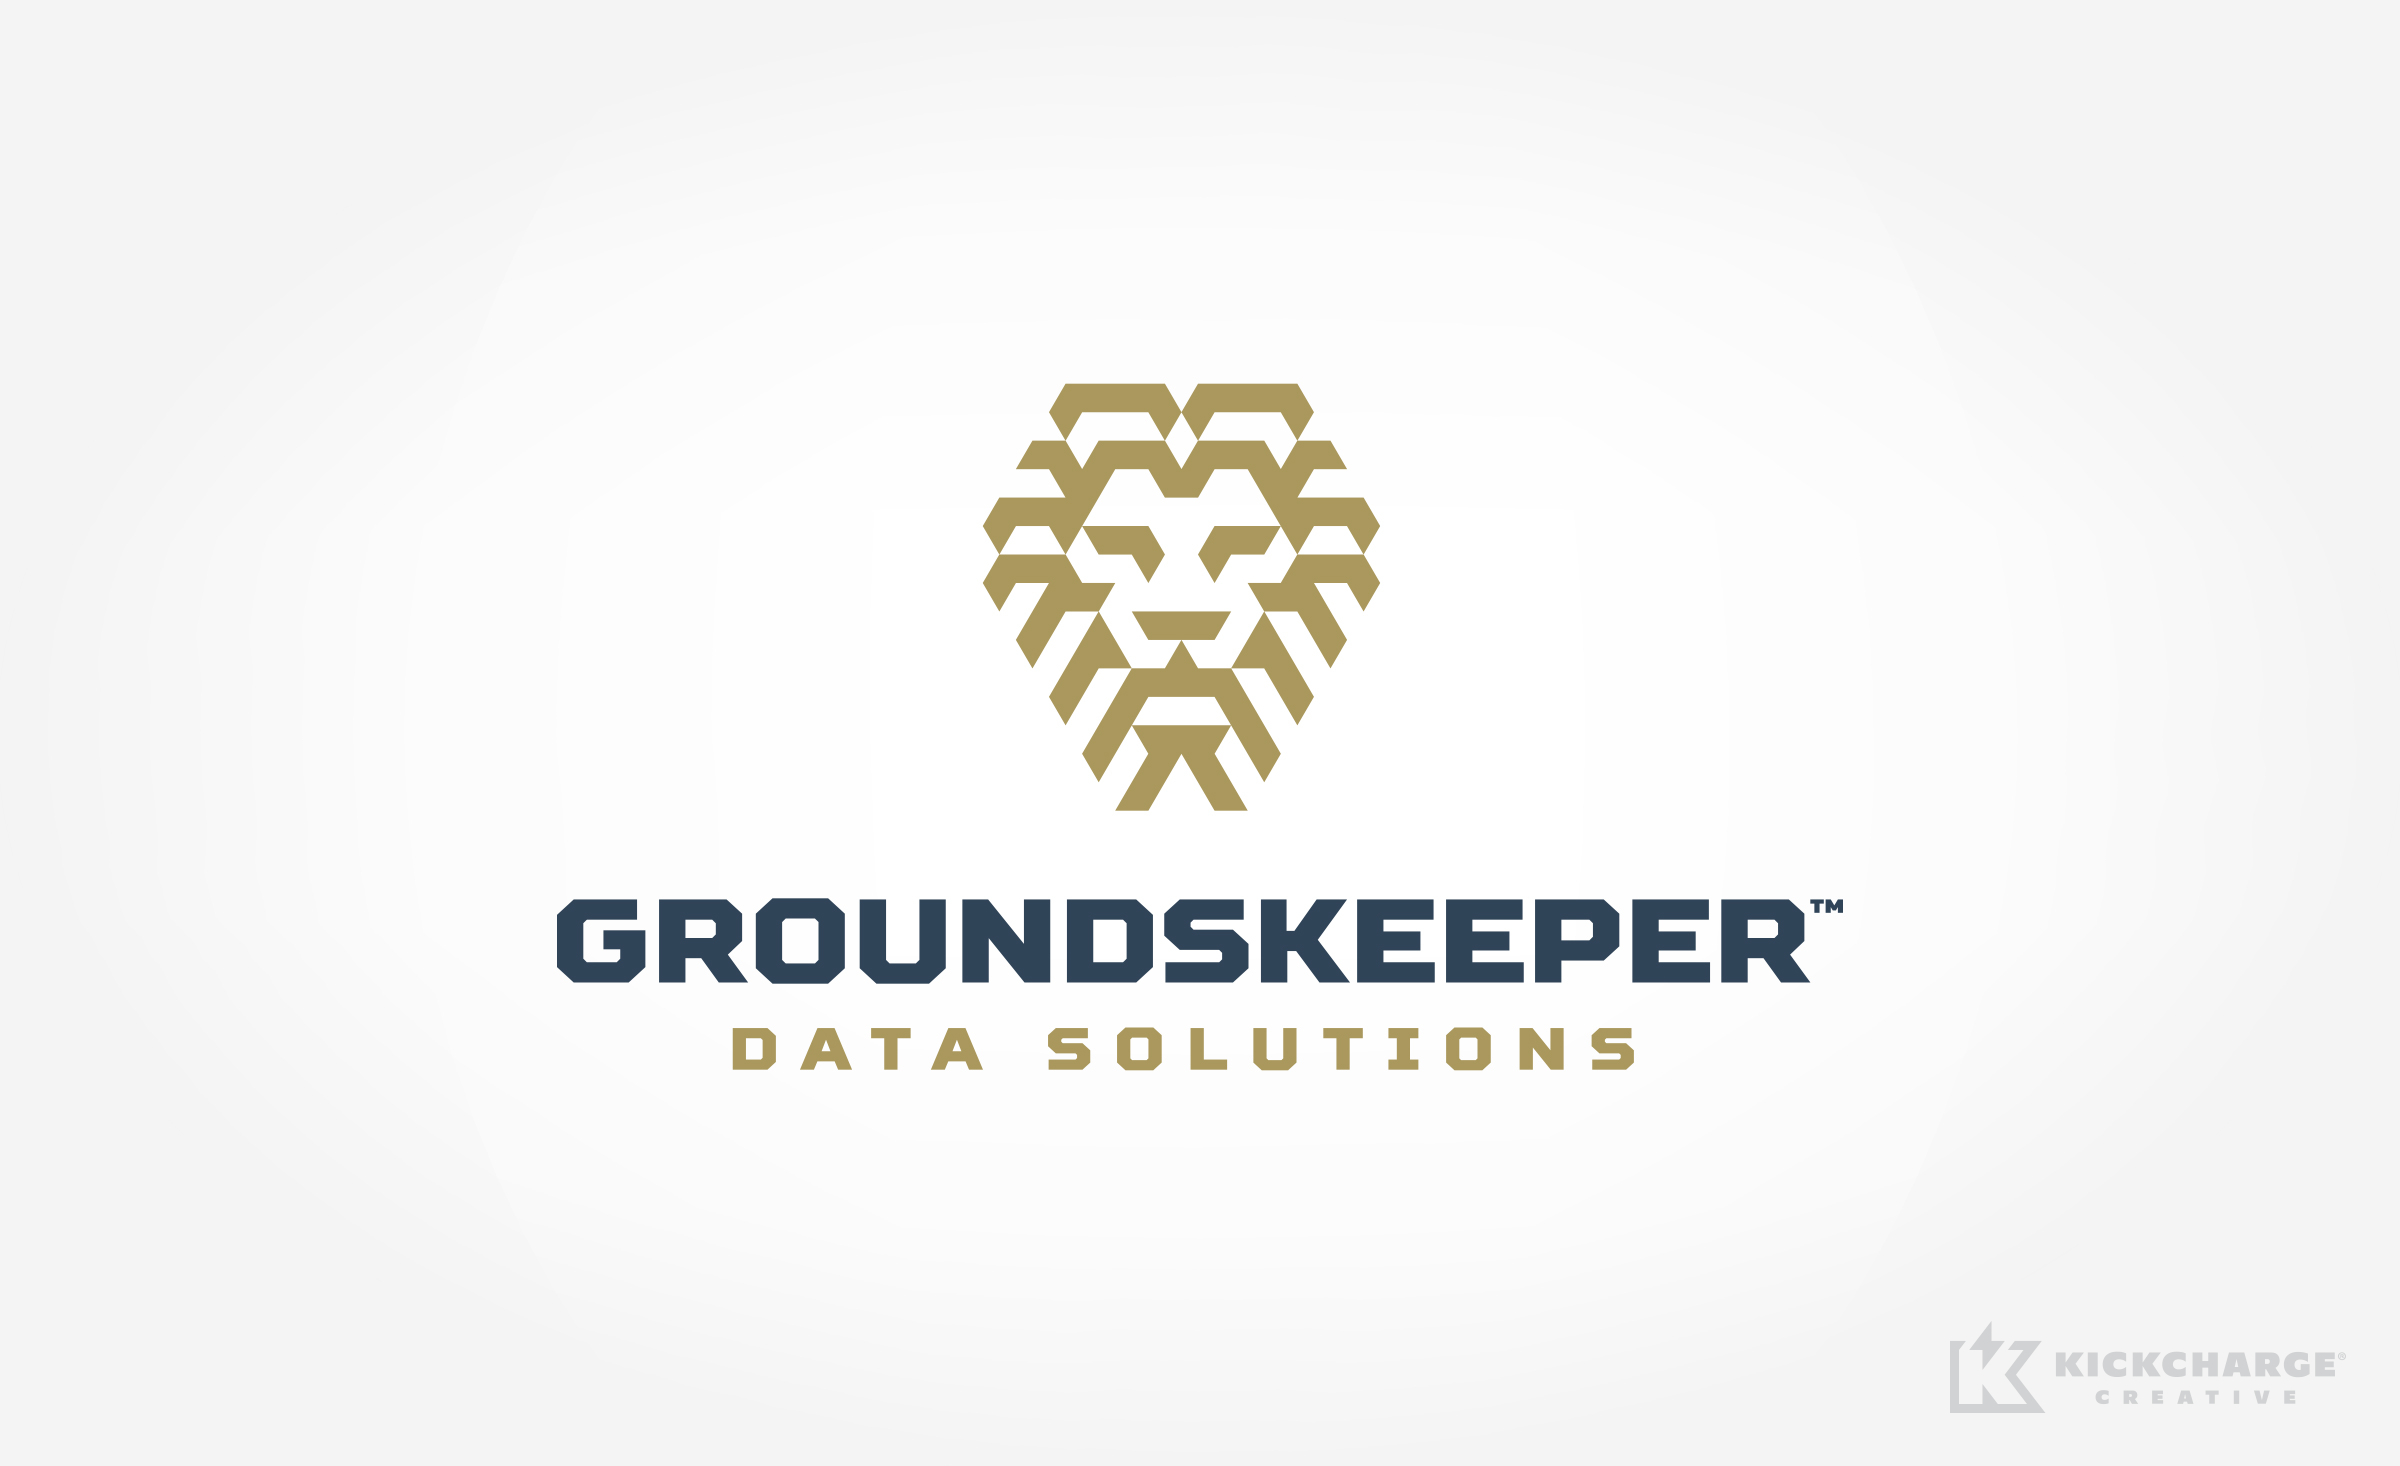 Groundskeeper Data Solutions